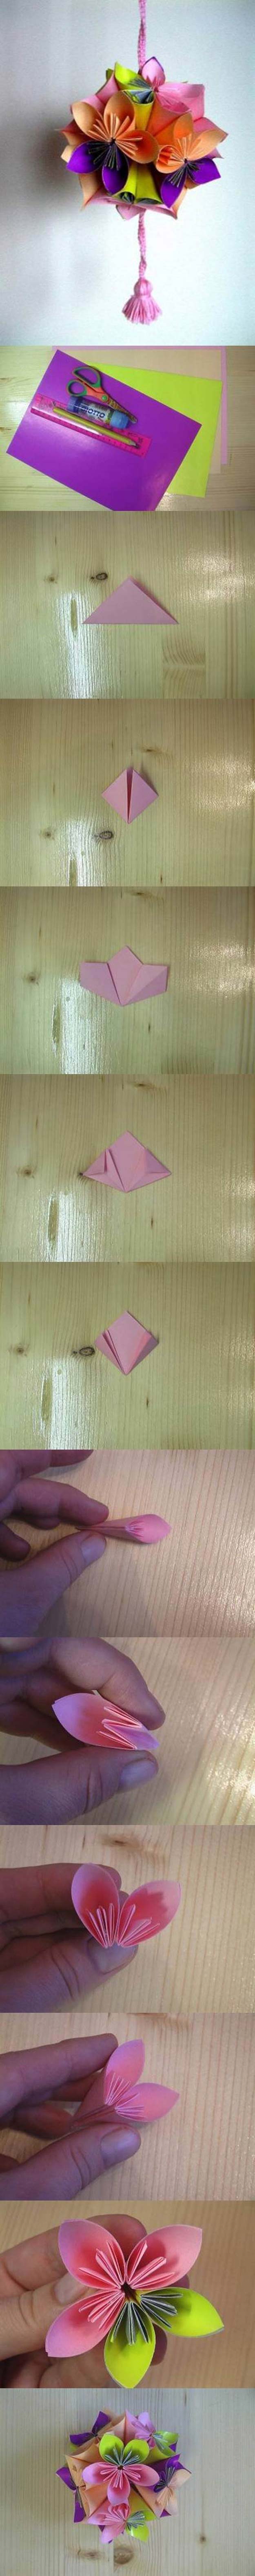 Best Origami Tutorials - Origami Flower Ball - Easy DIY Origami Tutorial Projects for With Instructions for Flowers, Dog, Gift Box, Star, Owl, Buttlerfly, Heart and Bookmark, Animals - Fun Paper Crafts for Teens, Kids and Adults #origami #crafts